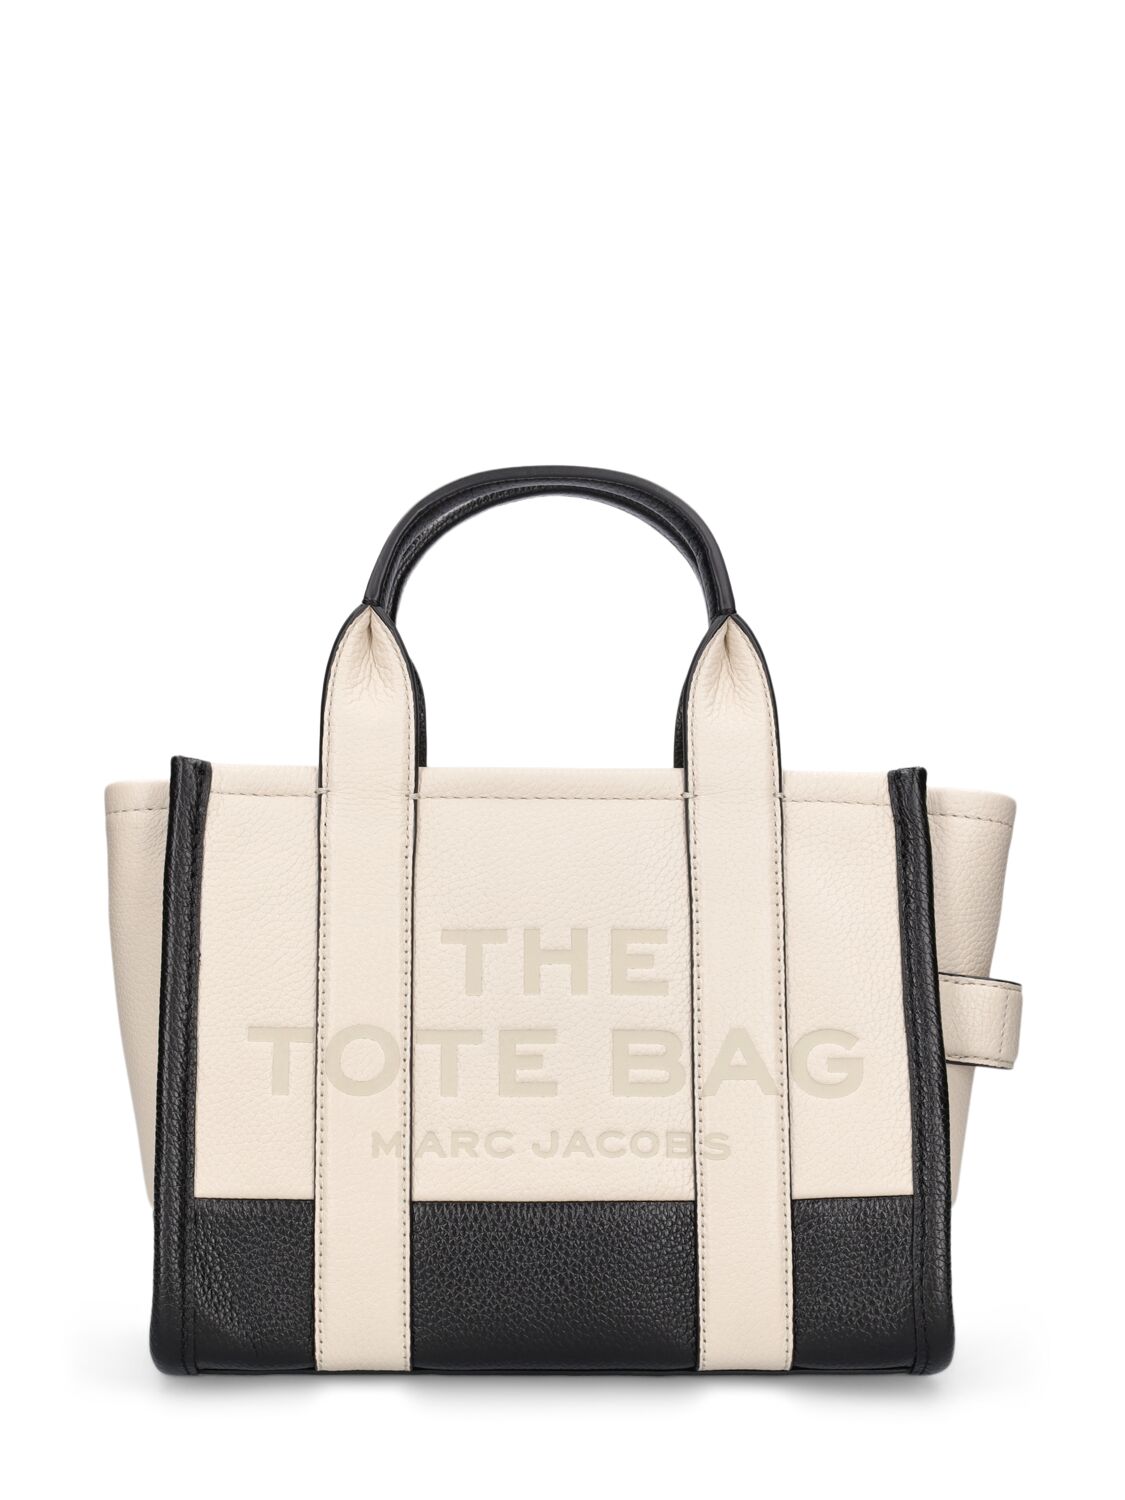 The Small Tote Leather Bag